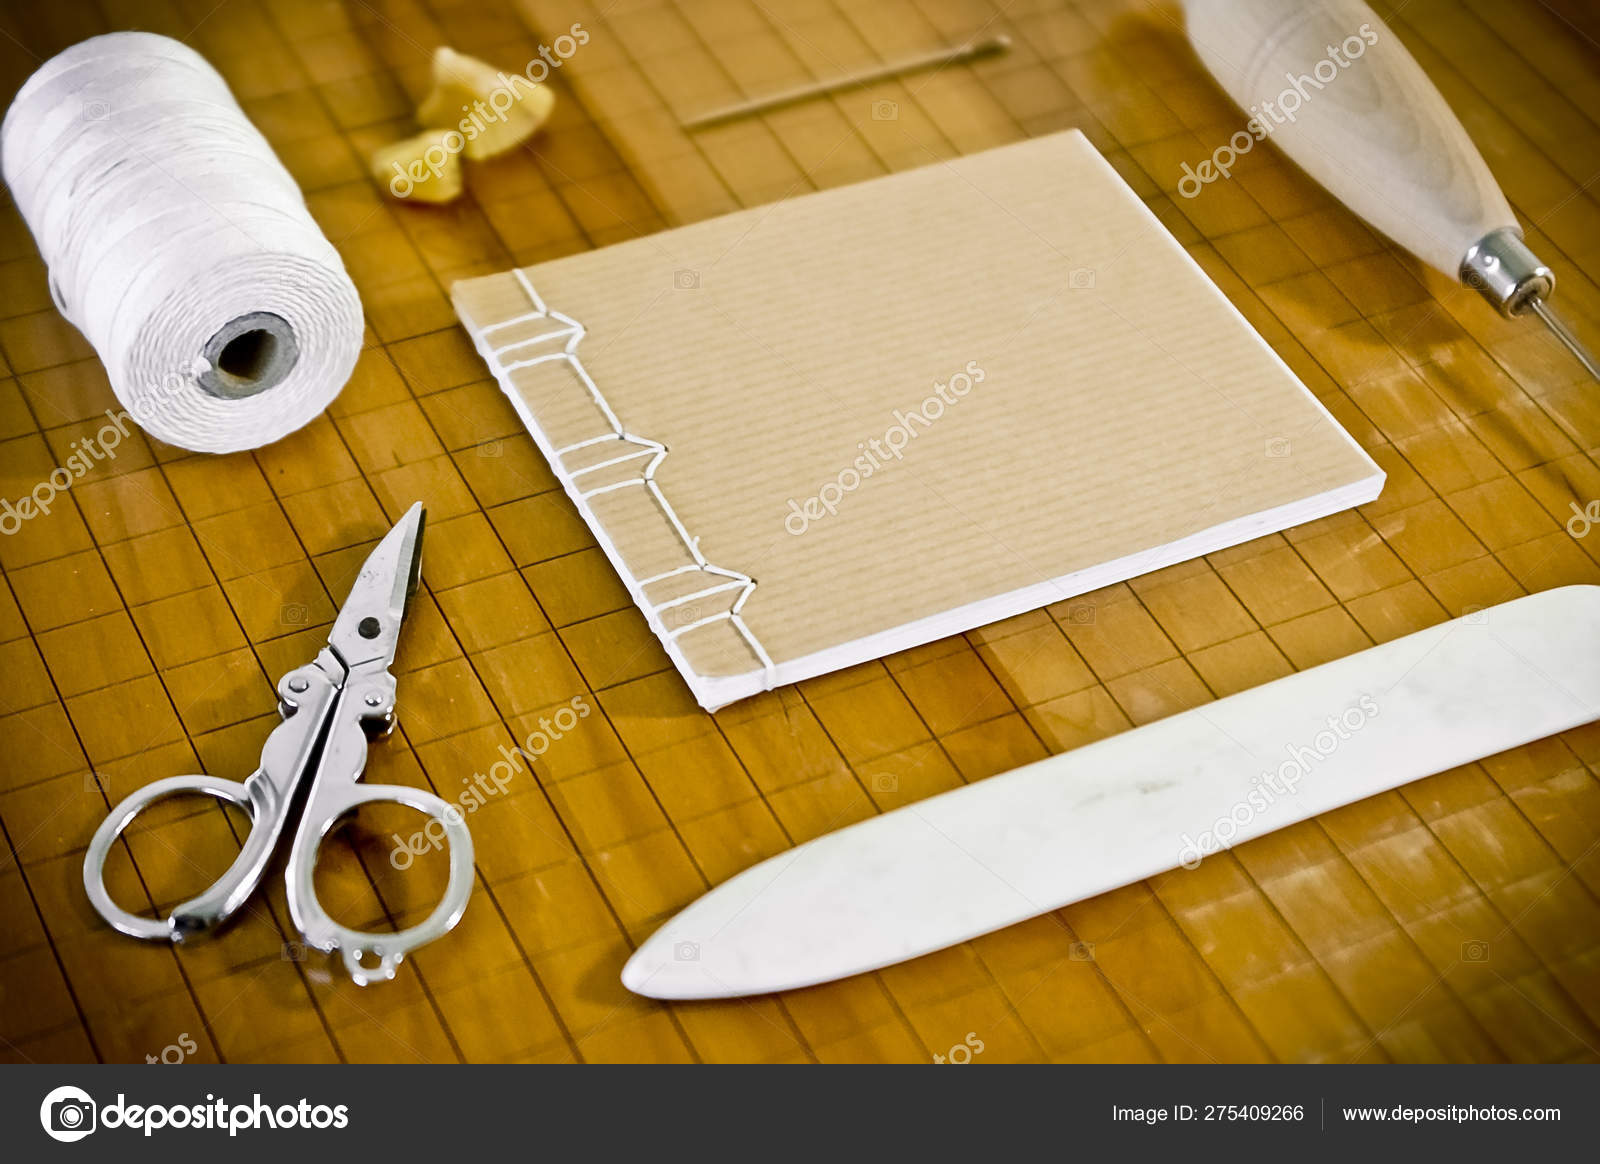 Small Hand Sewn Notebook Bookbinding Supplies Stock Photo by